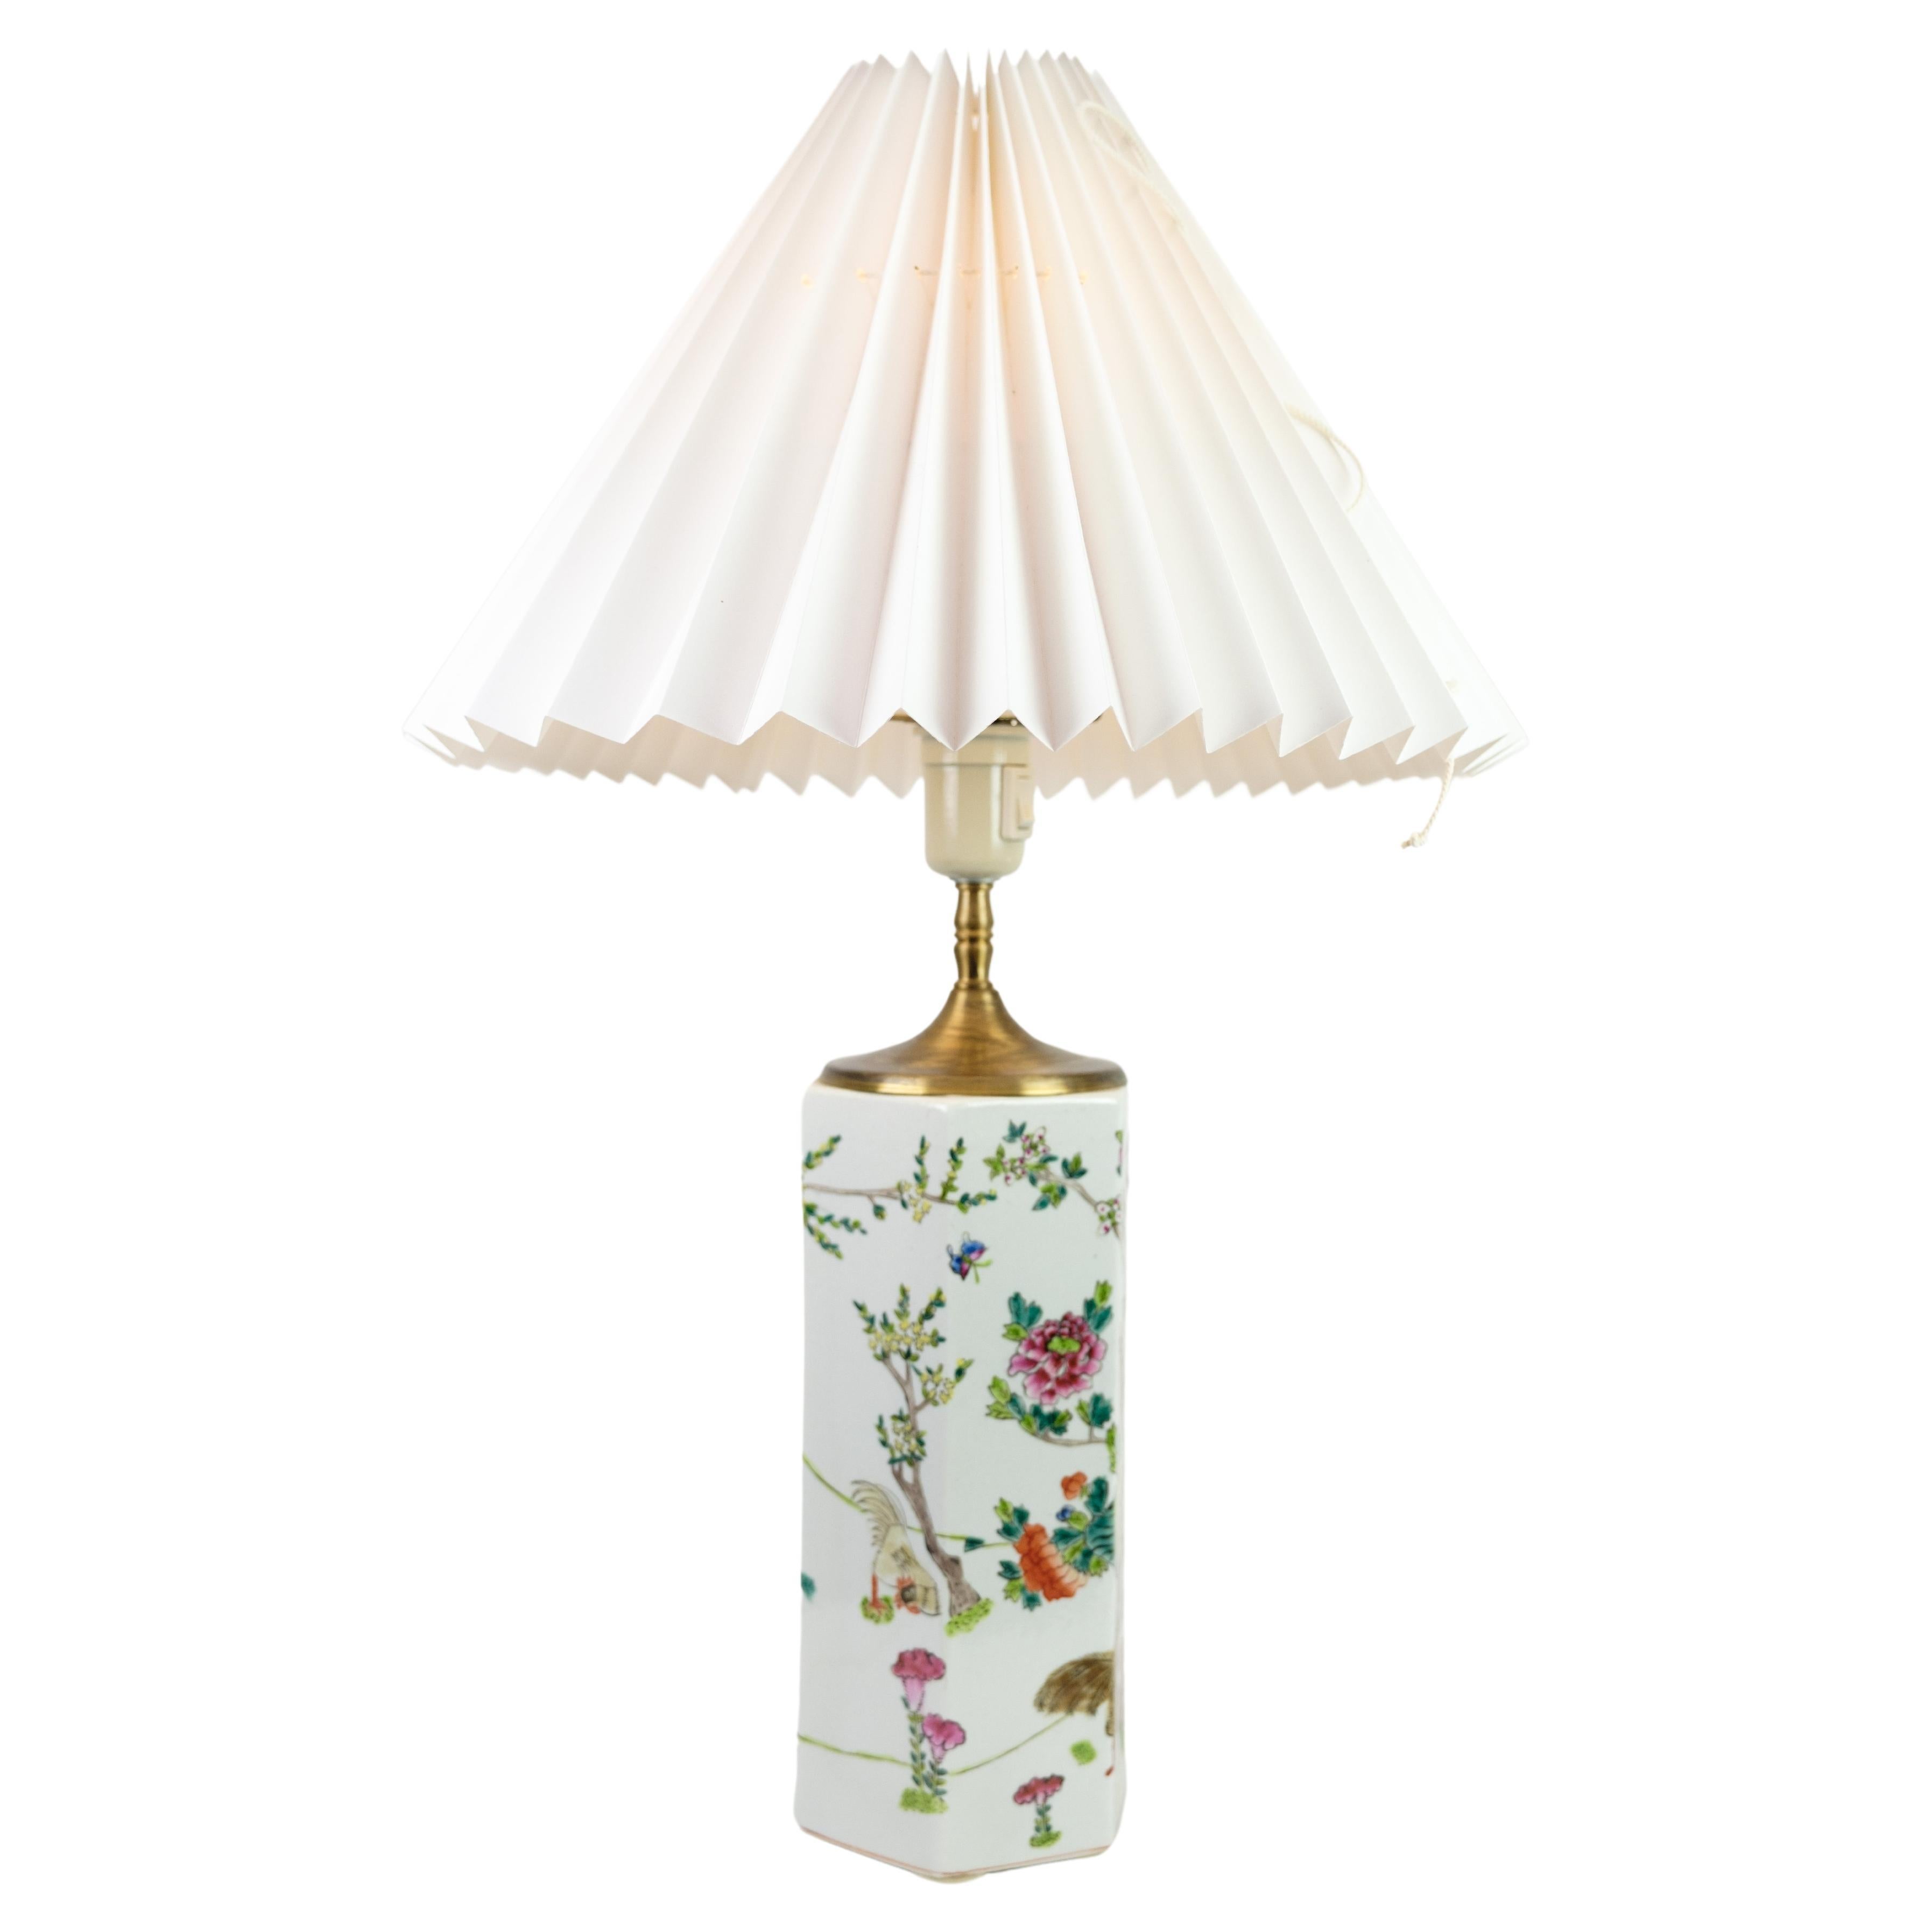 This Chinese table lamp, crafted from porcelain and adorned with motifs of nature, dates back to the 1920s. It stands as an exquisite example of vintage craftsmanship, boasting fine used condition and accompanied by a similar white screen.

The